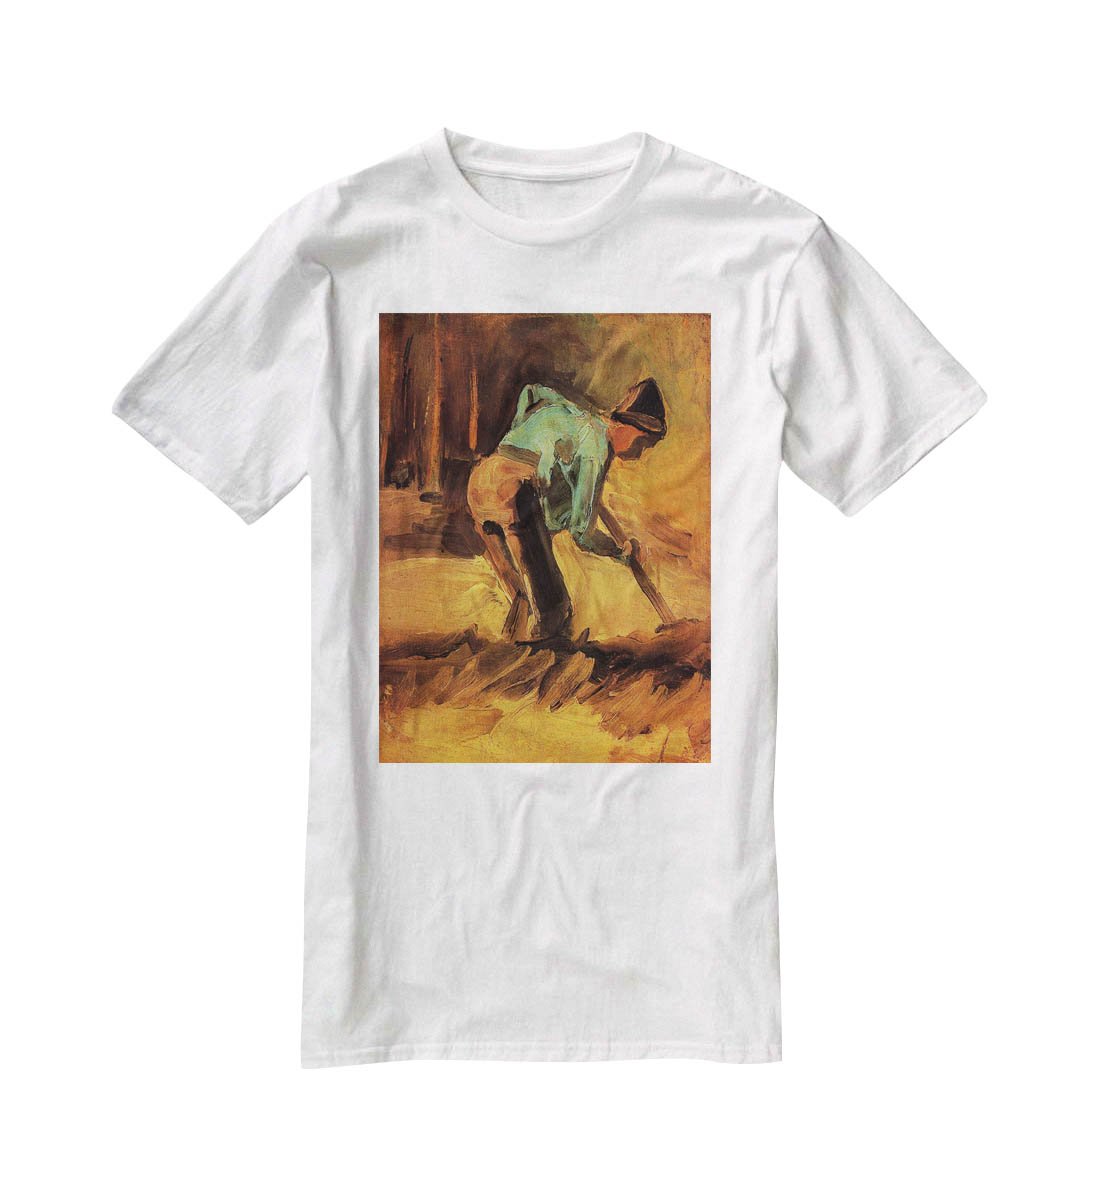 Man Stooping with Stick or Spade by Van Gogh T-Shirt - Canvas Art Rocks - 5